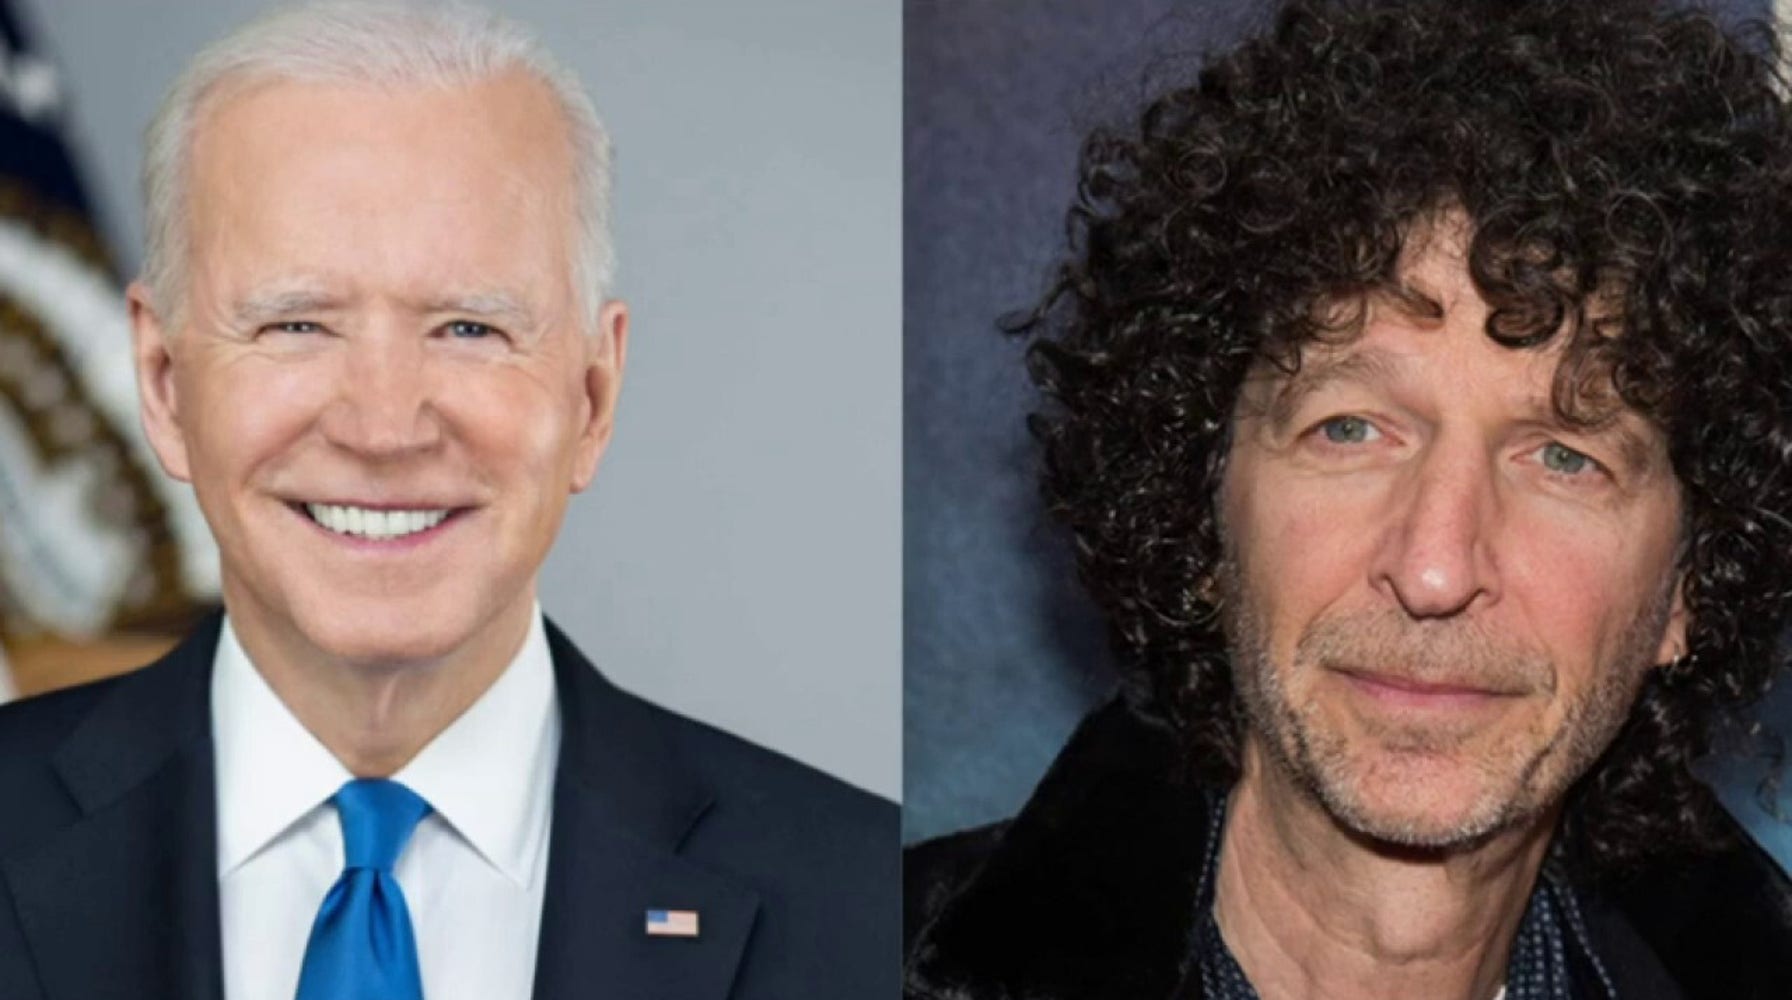 Biden's Interview with Howard Stern Raises Eyebrows Over Truthfulness